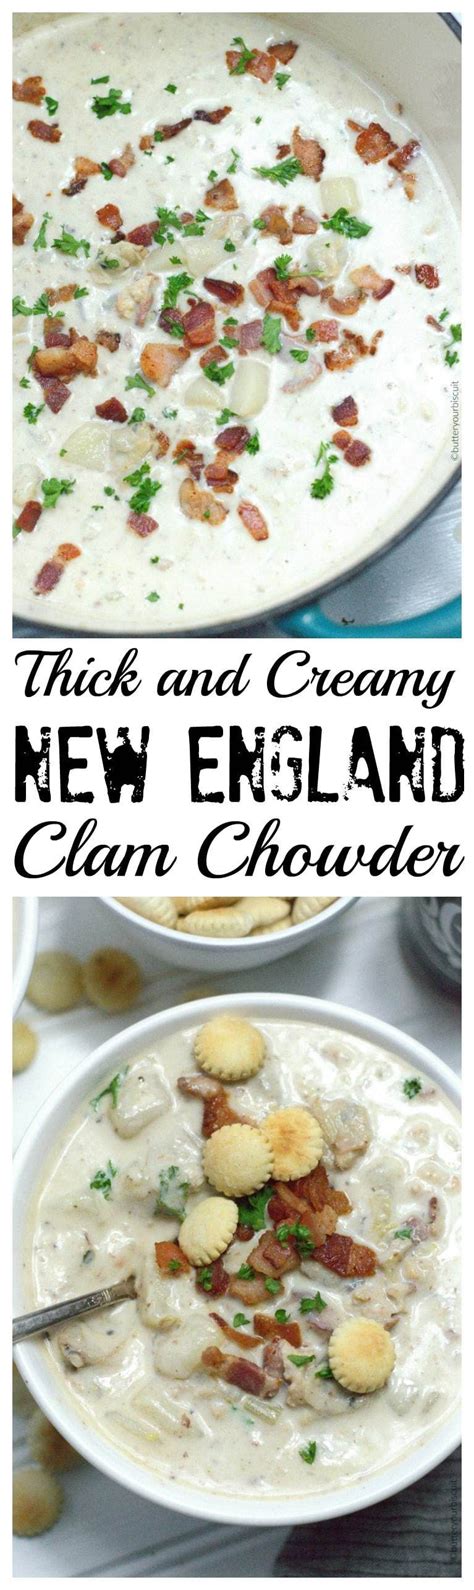 New England Clam Chowder Recipe Butter Your Biscuit Recipe Clam